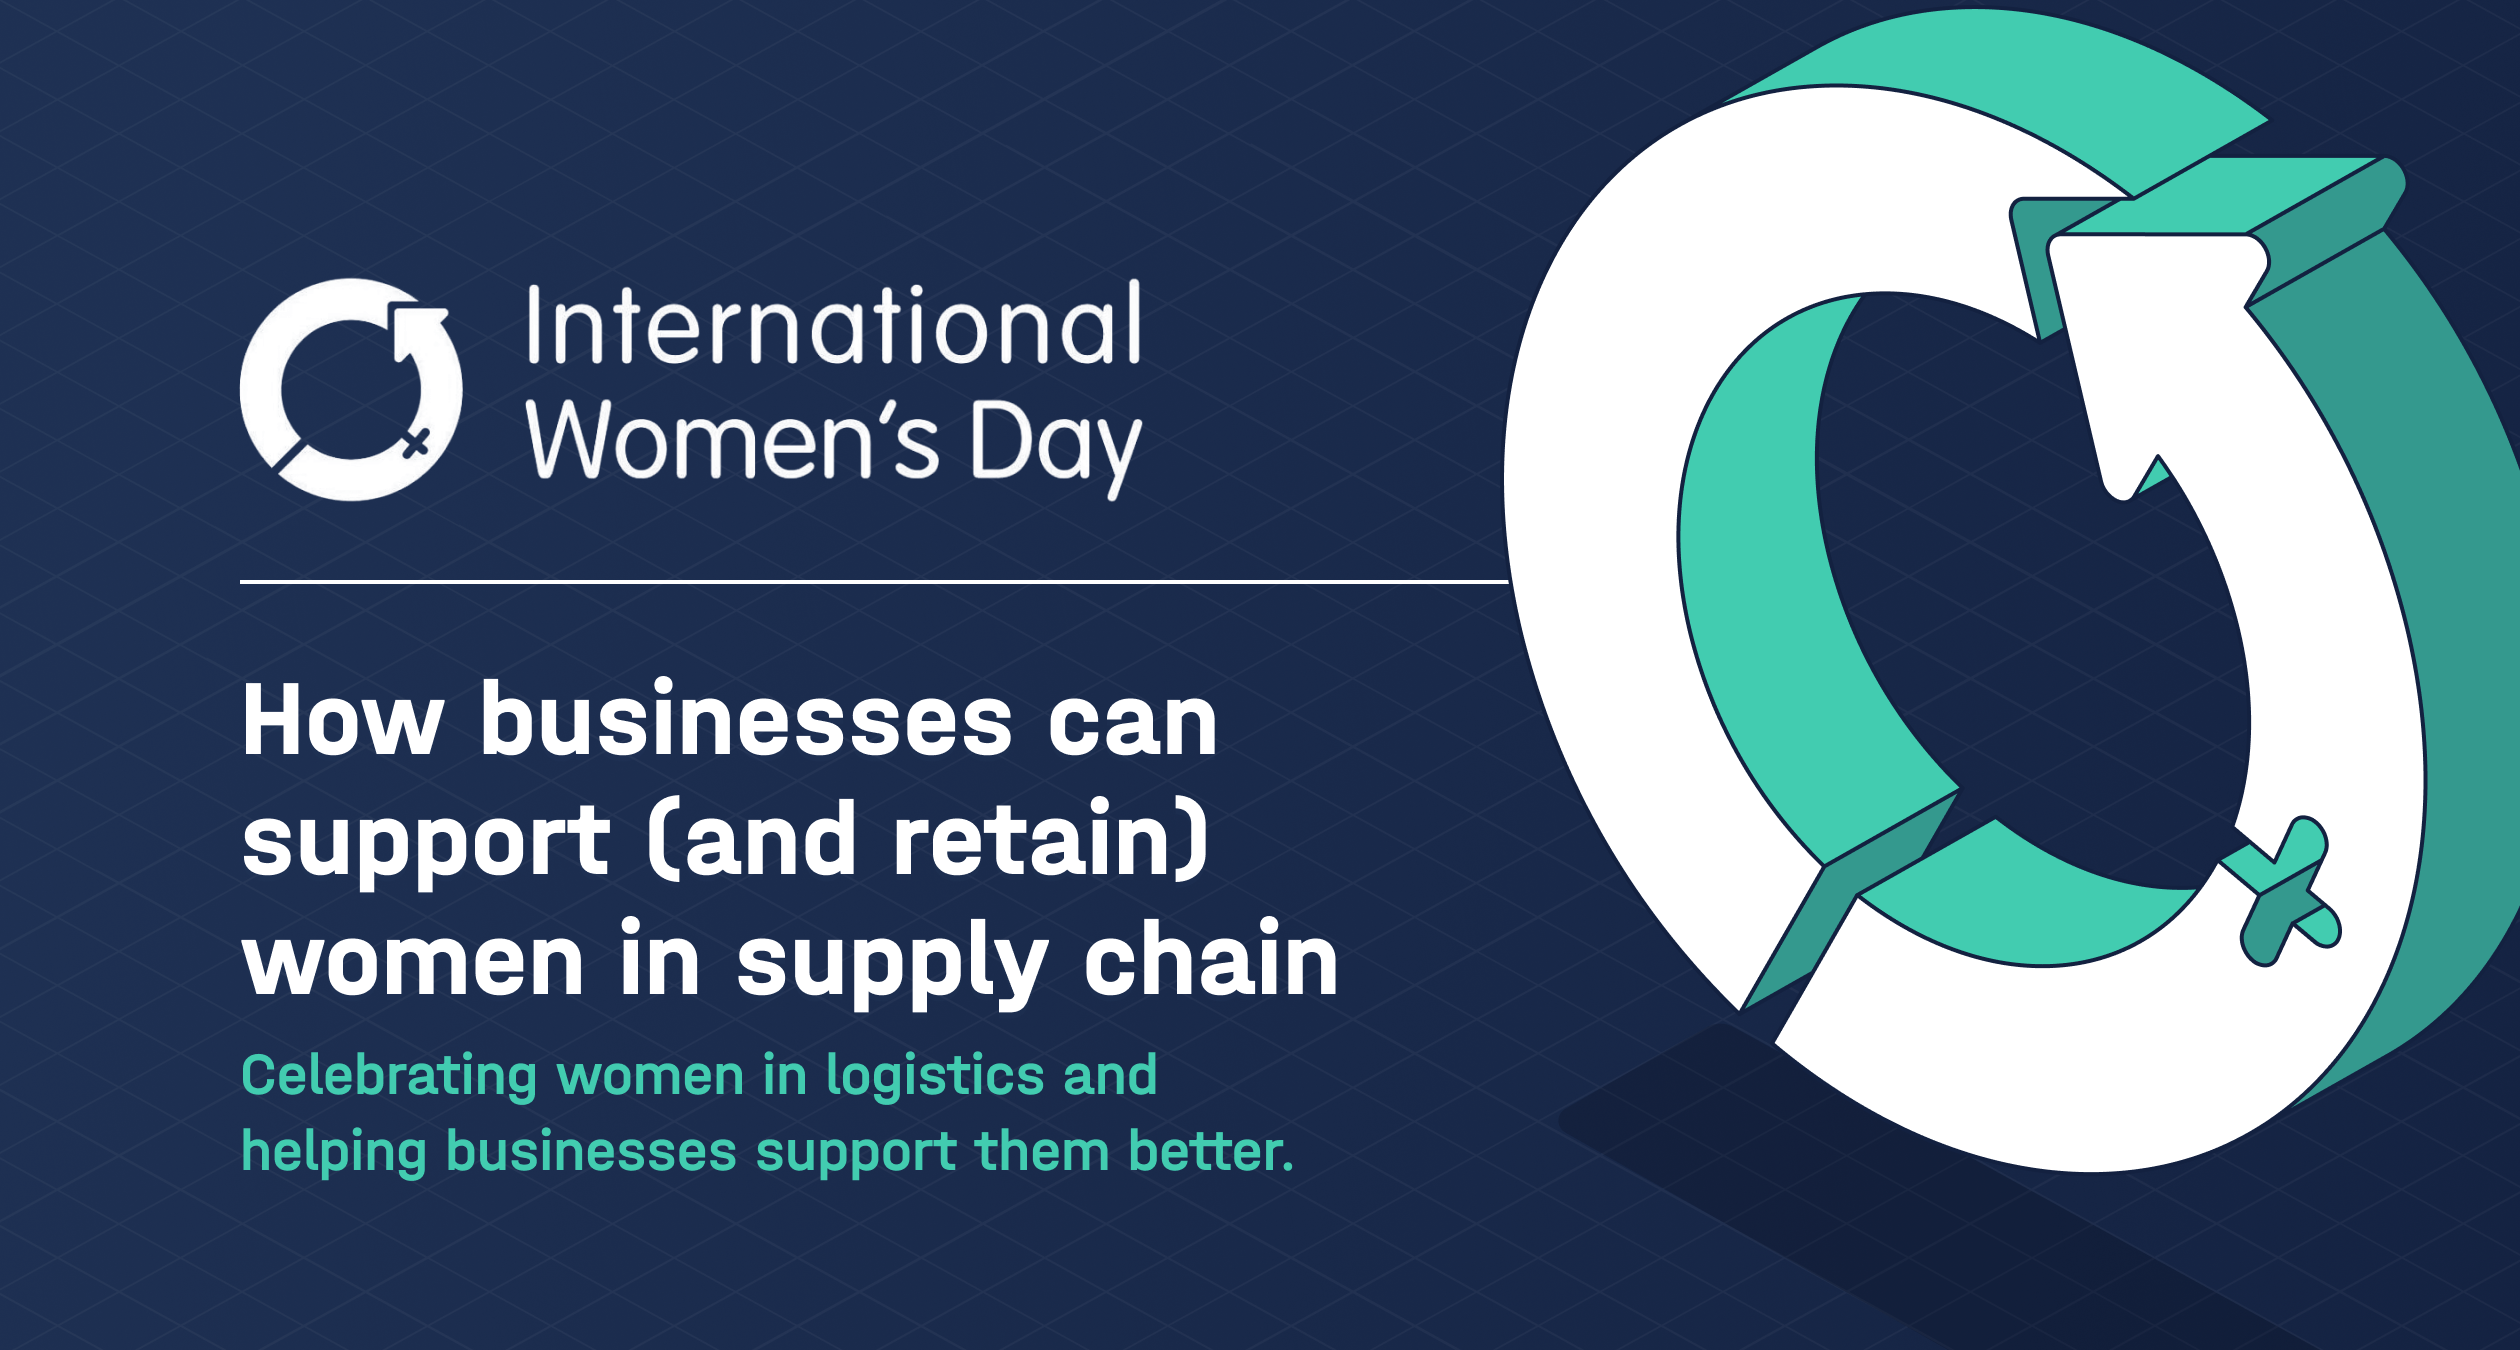 International Women’s Day logo with women in supply chain blog title